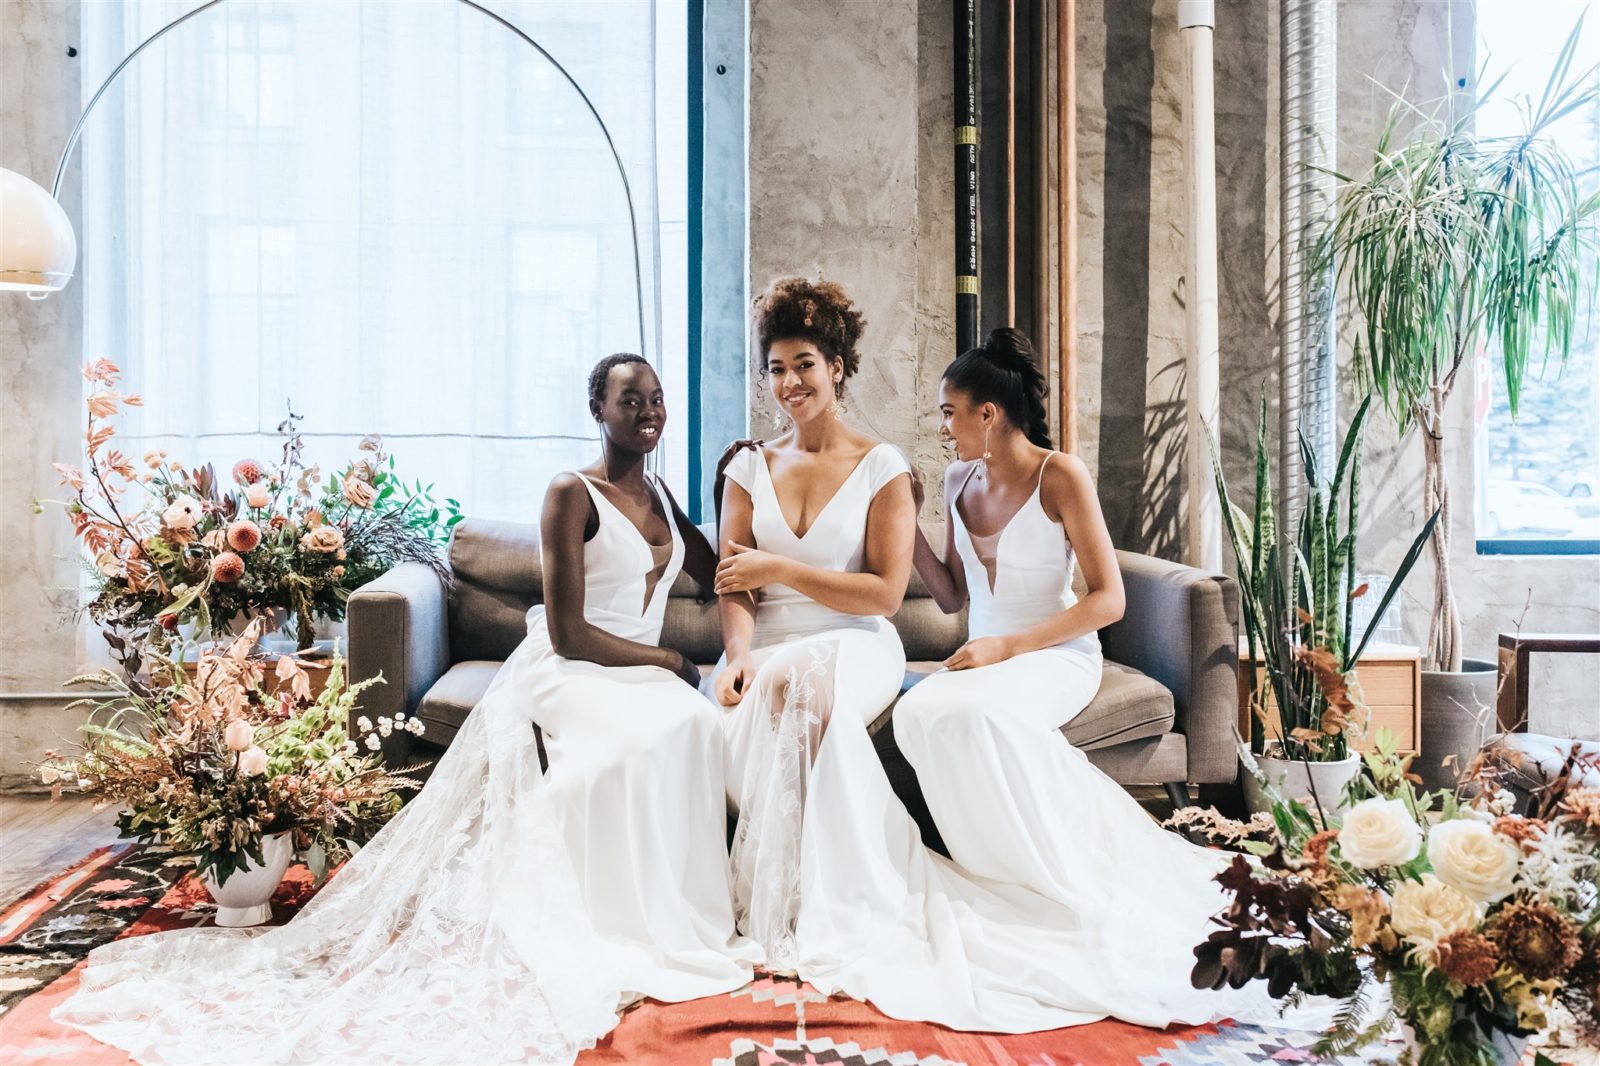 Wild, earthy and organic bridal style inspiration with chic and sexy gowns by Anais Anette